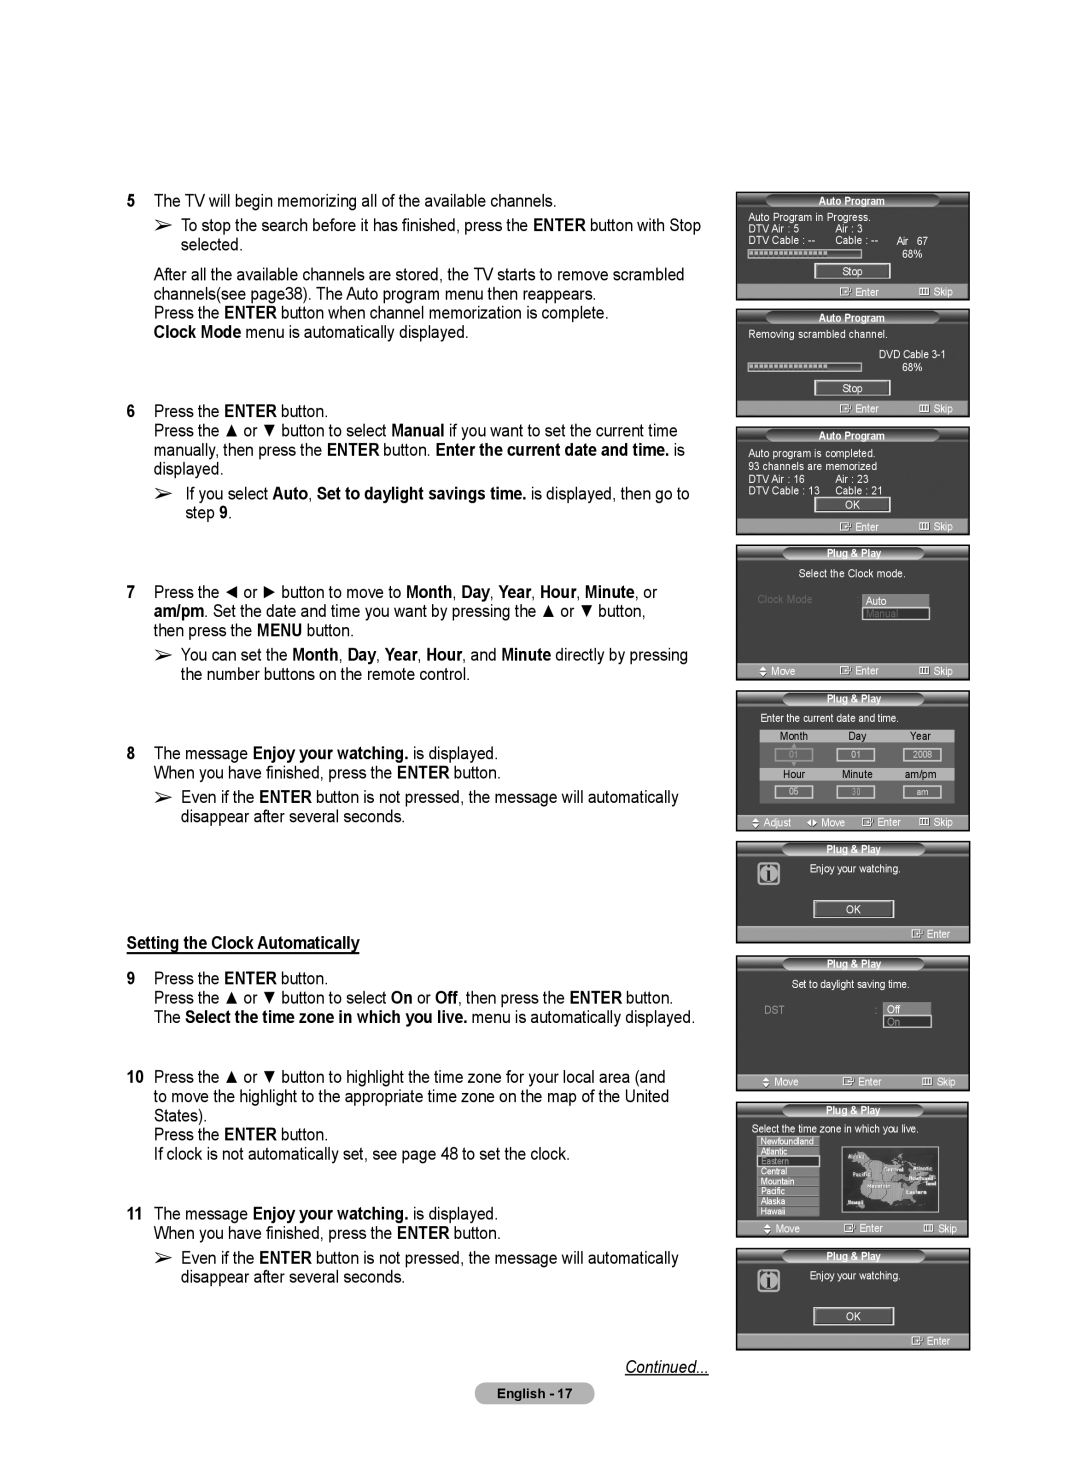 Samsung 460 user manual Setting the Clock Automatically, Continued, Manual 